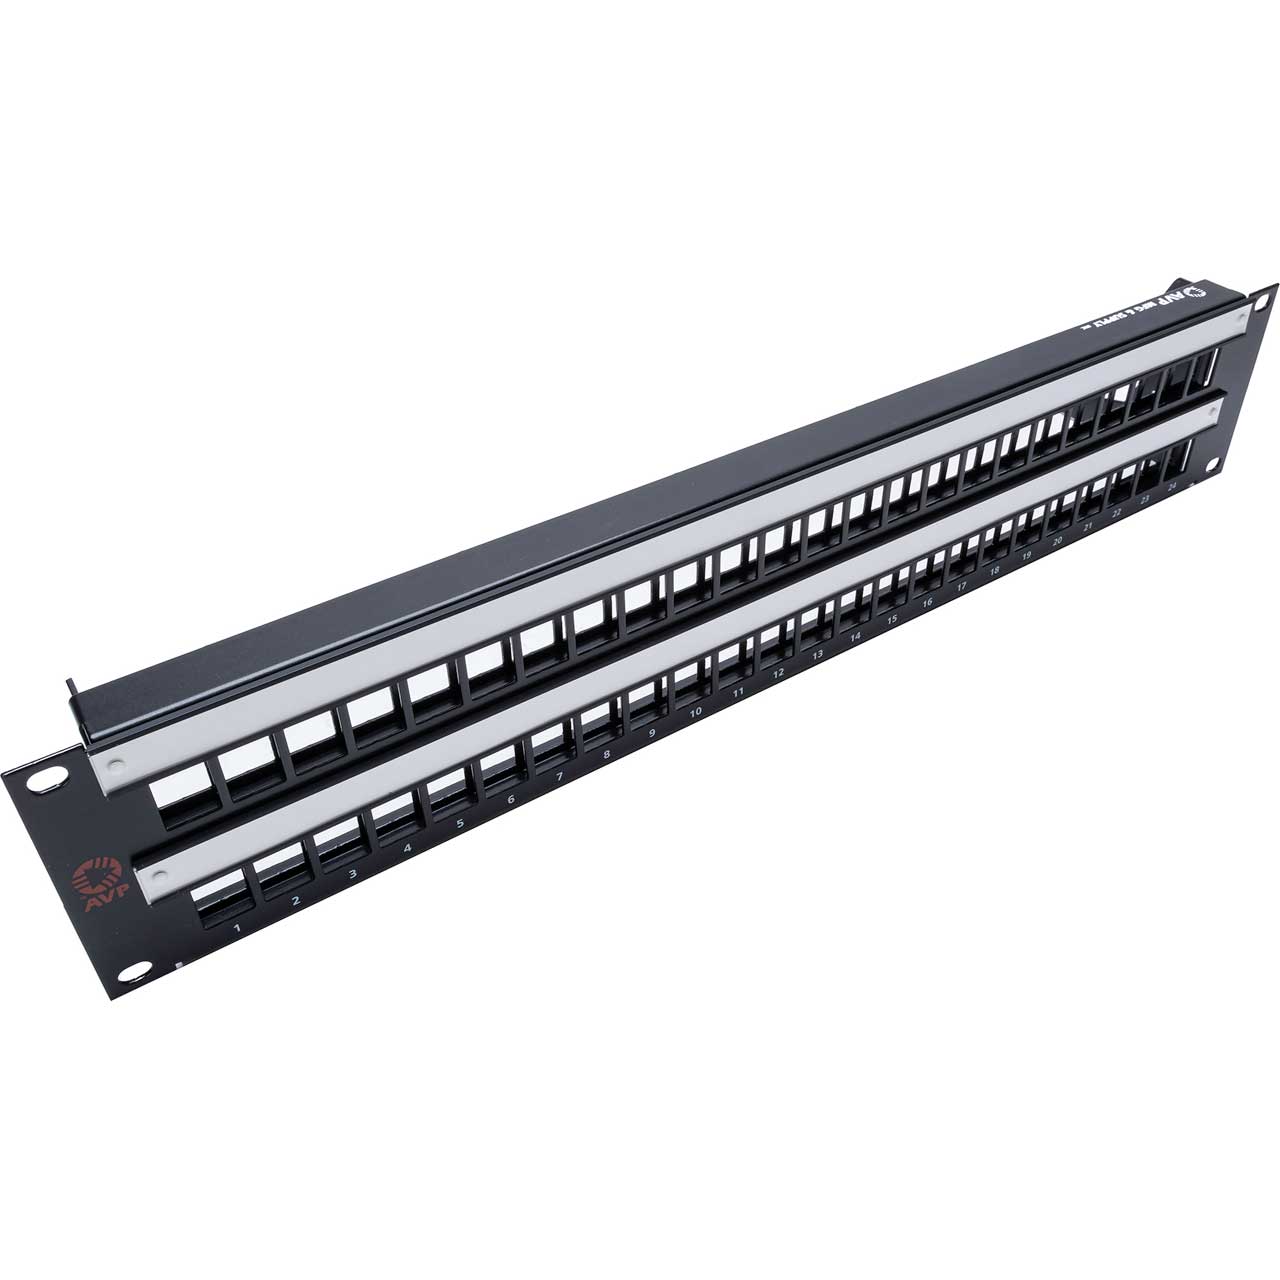 AVP WK-YR224E2-Z-B40 2RU 2x24 Unloaded Keystone Patch Panel with 2 Front Designation Strips - 4 inch Cable Bar - Black